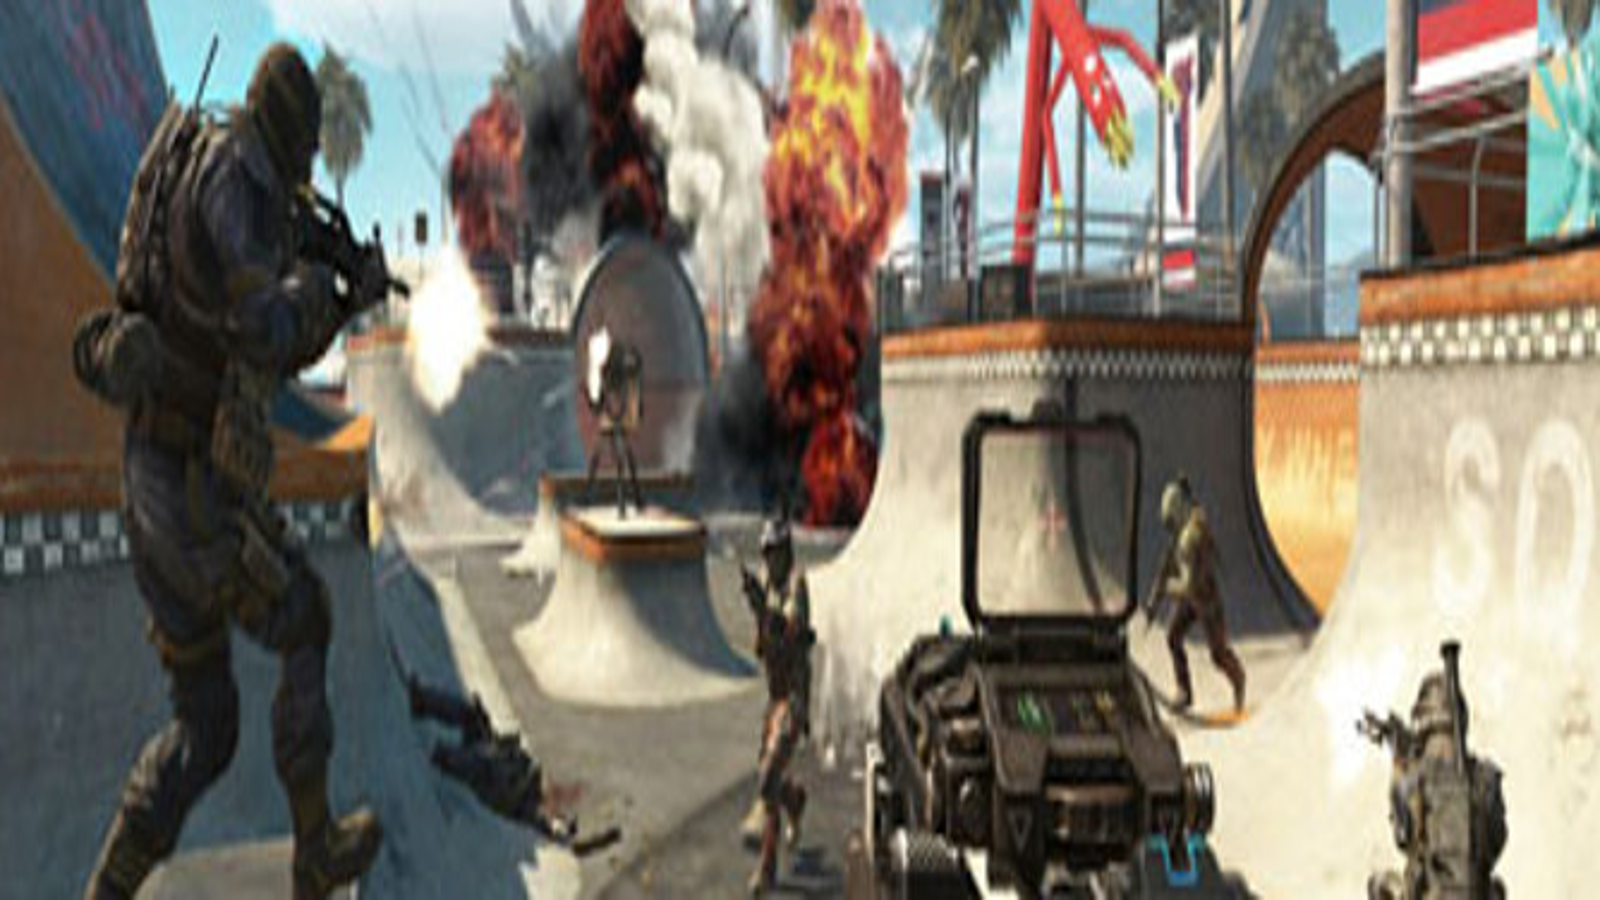 black ops 2 png